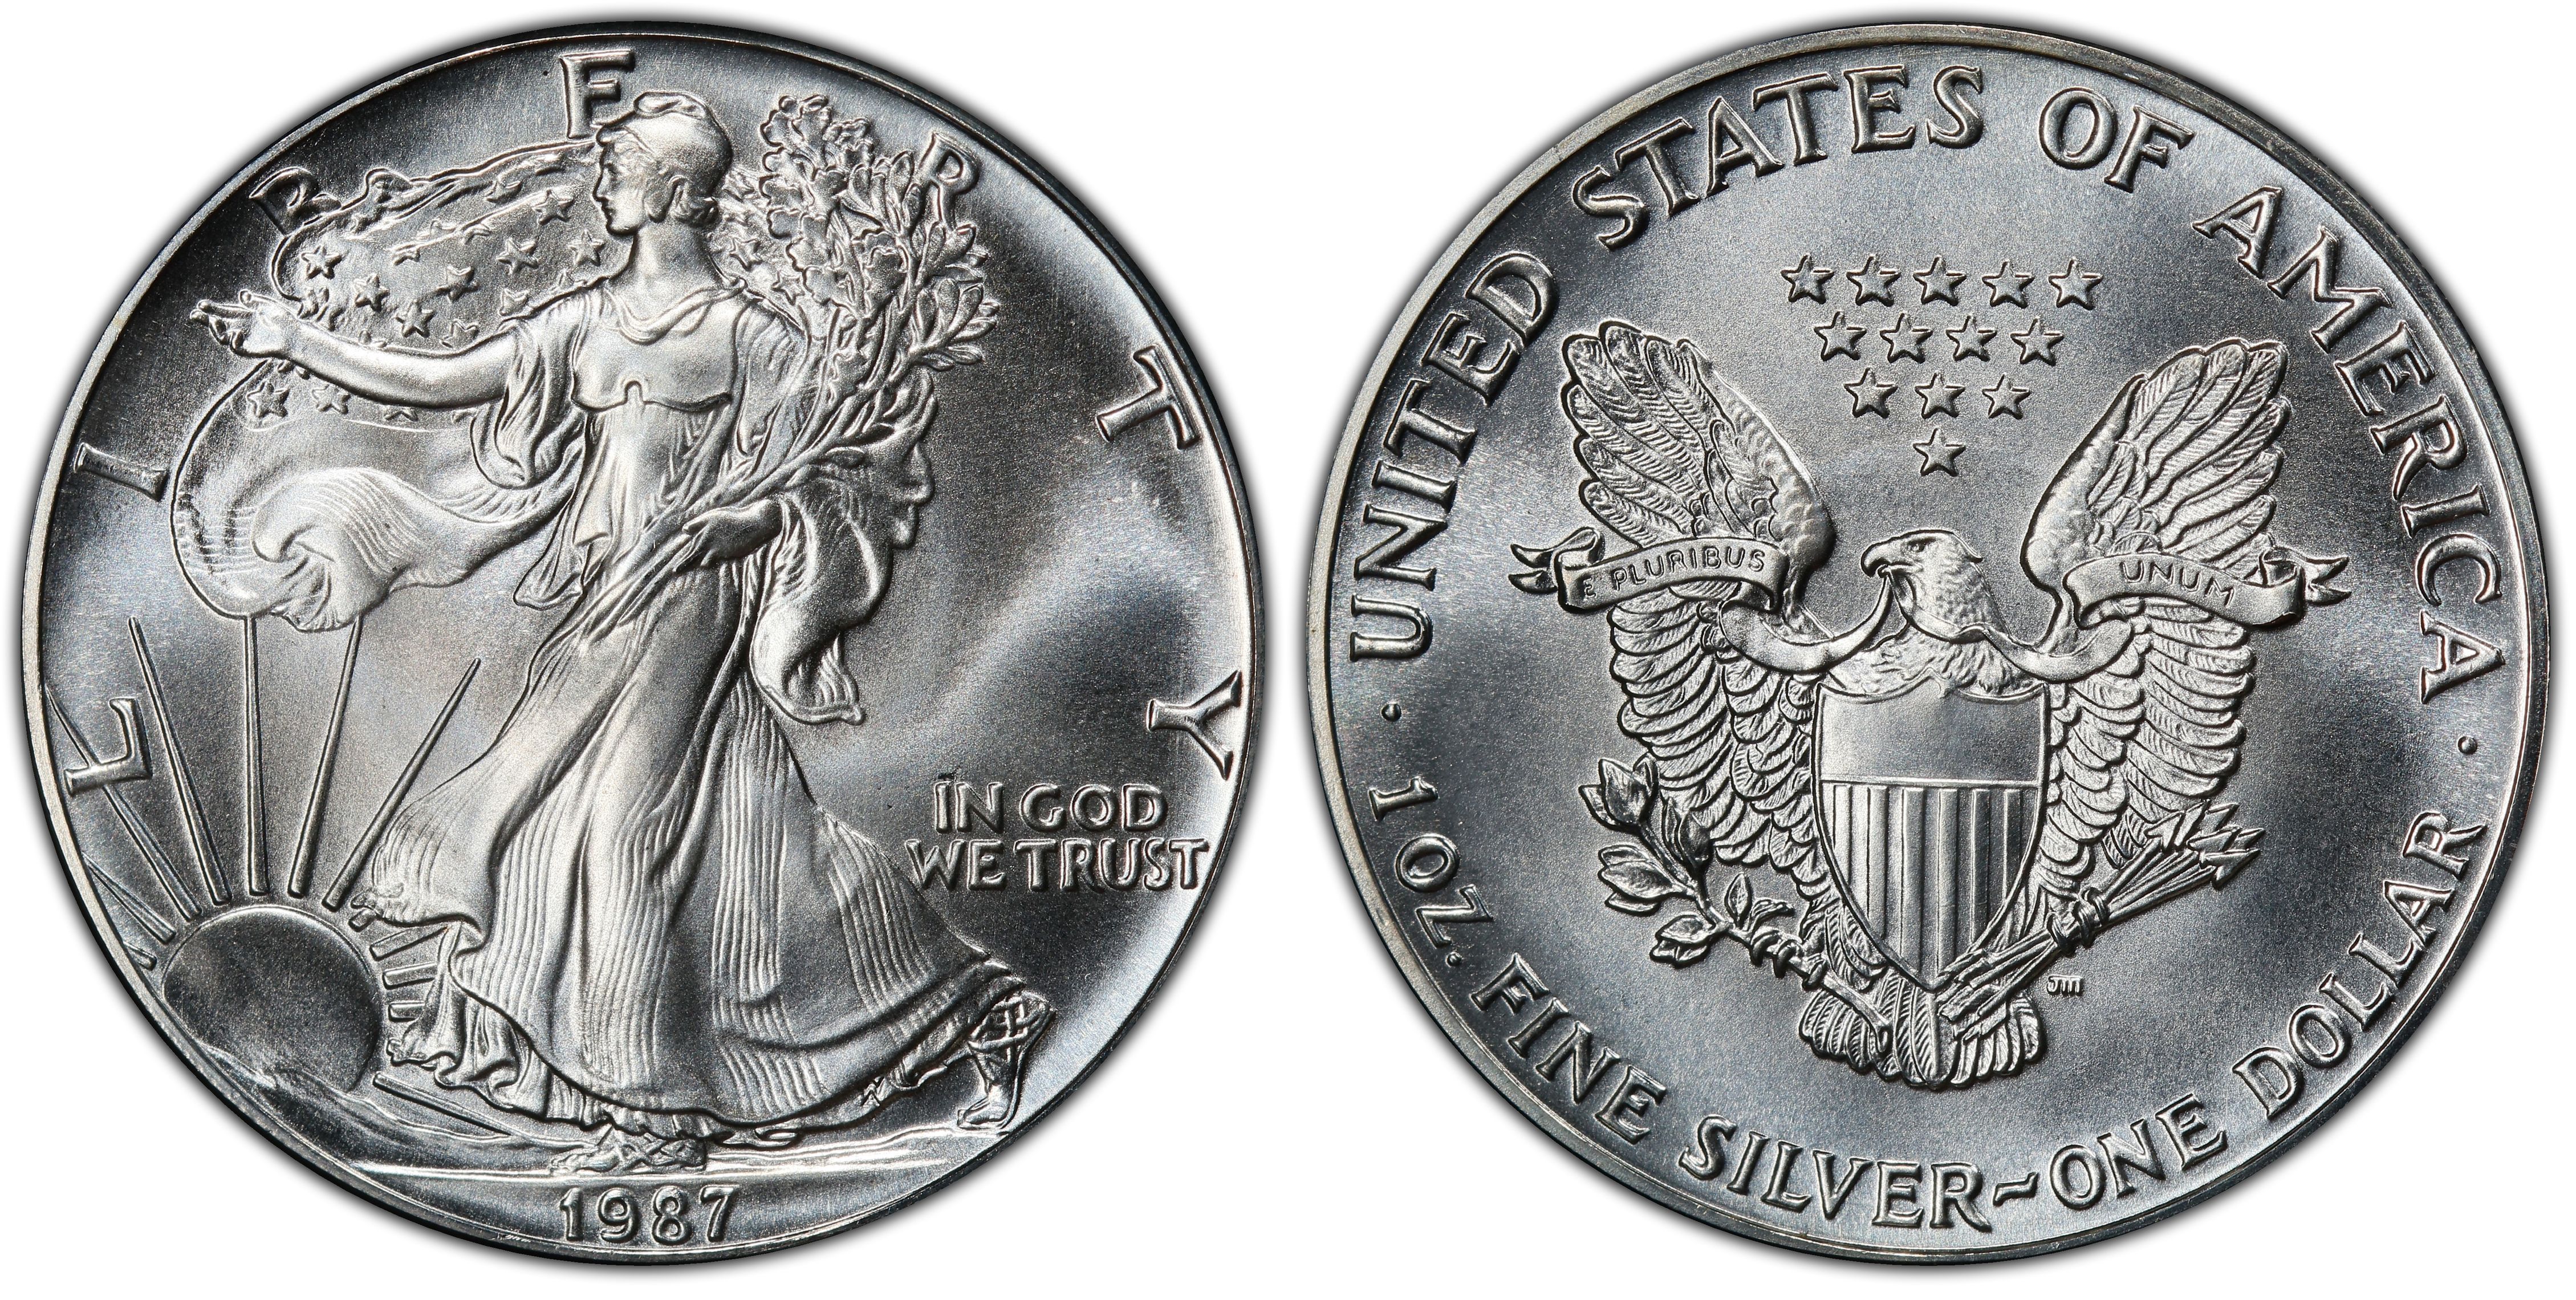 1987 $1 Silver Eagle (Regular Strike) Silver Eagles - PCGS CoinFacts